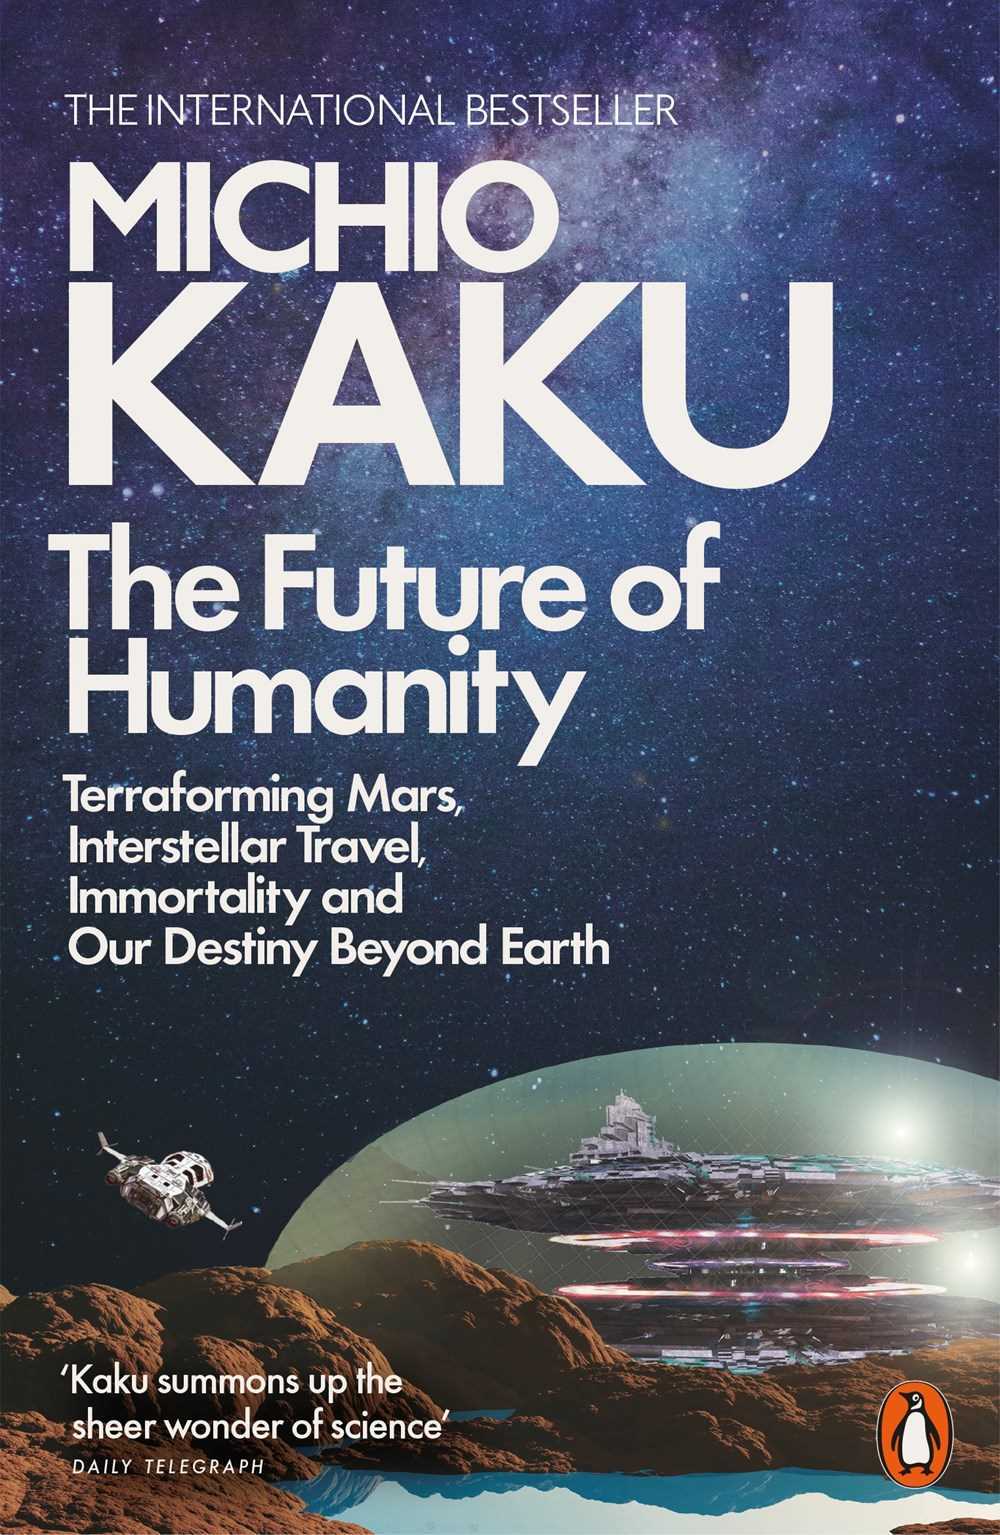 Future of Humanity